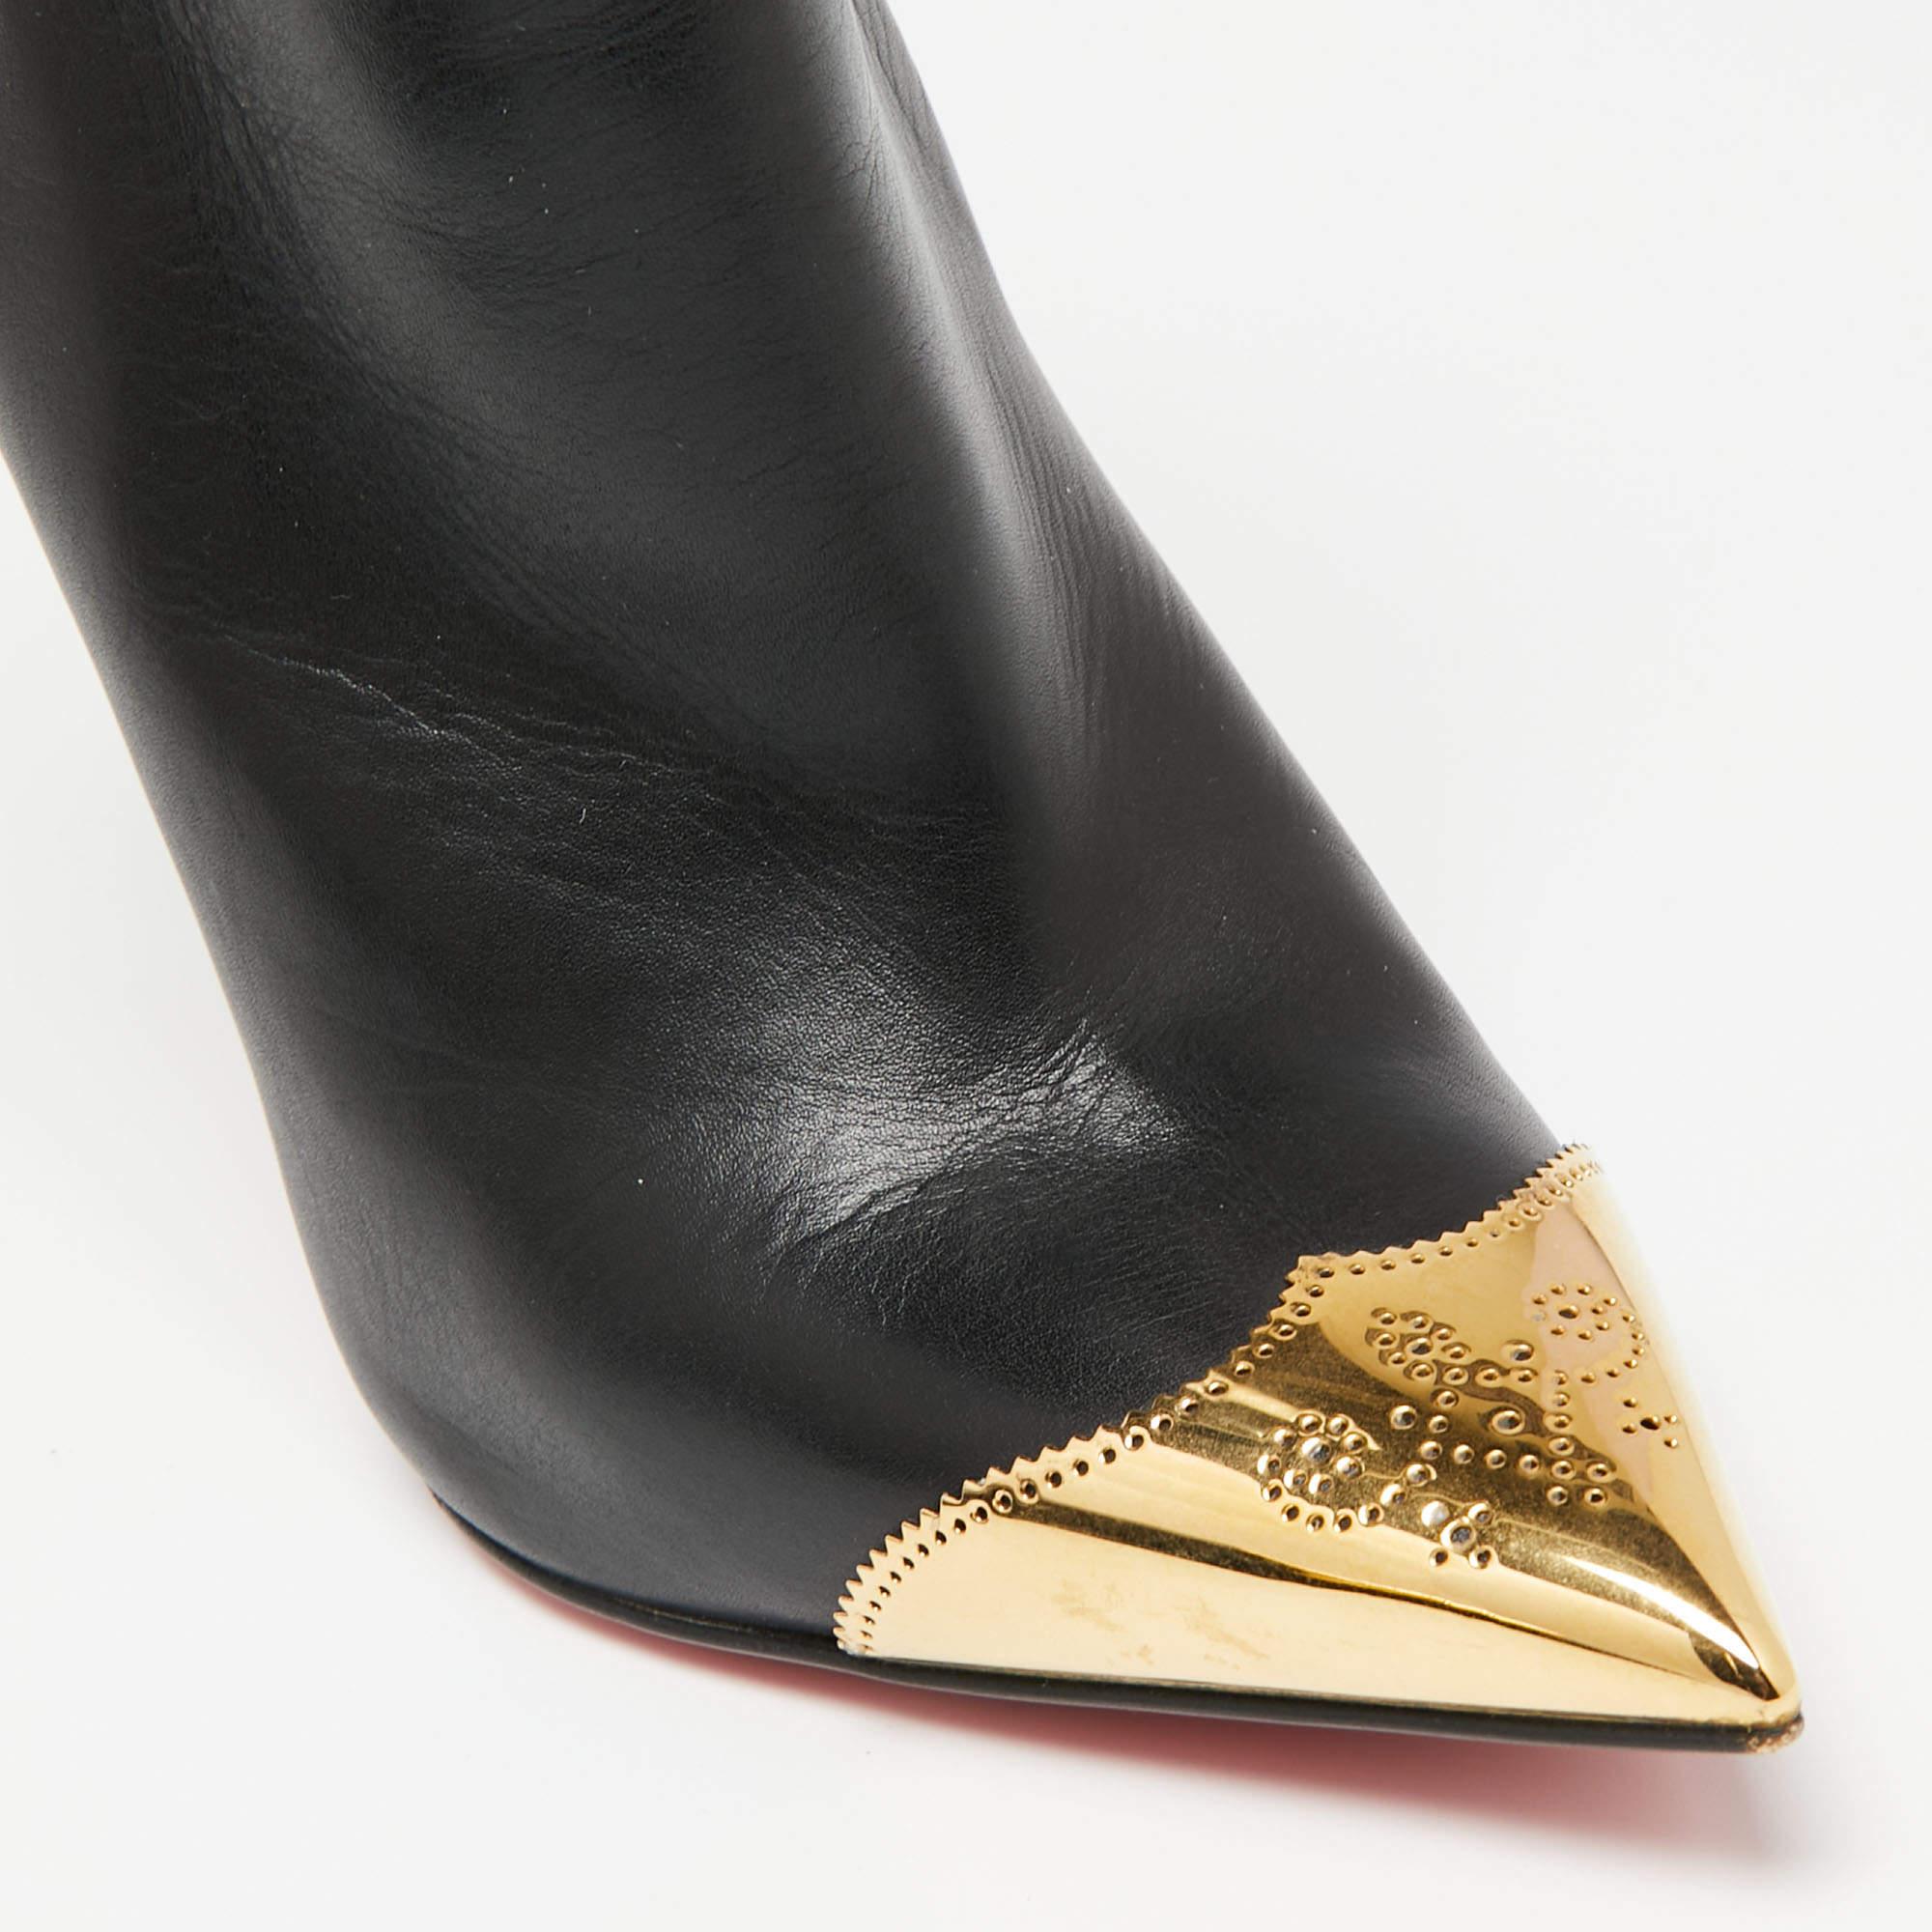 Christian Louboutin Black Leather Calamijane Pointed-Toe Ankle Booties Size 35.5 For Sale 4